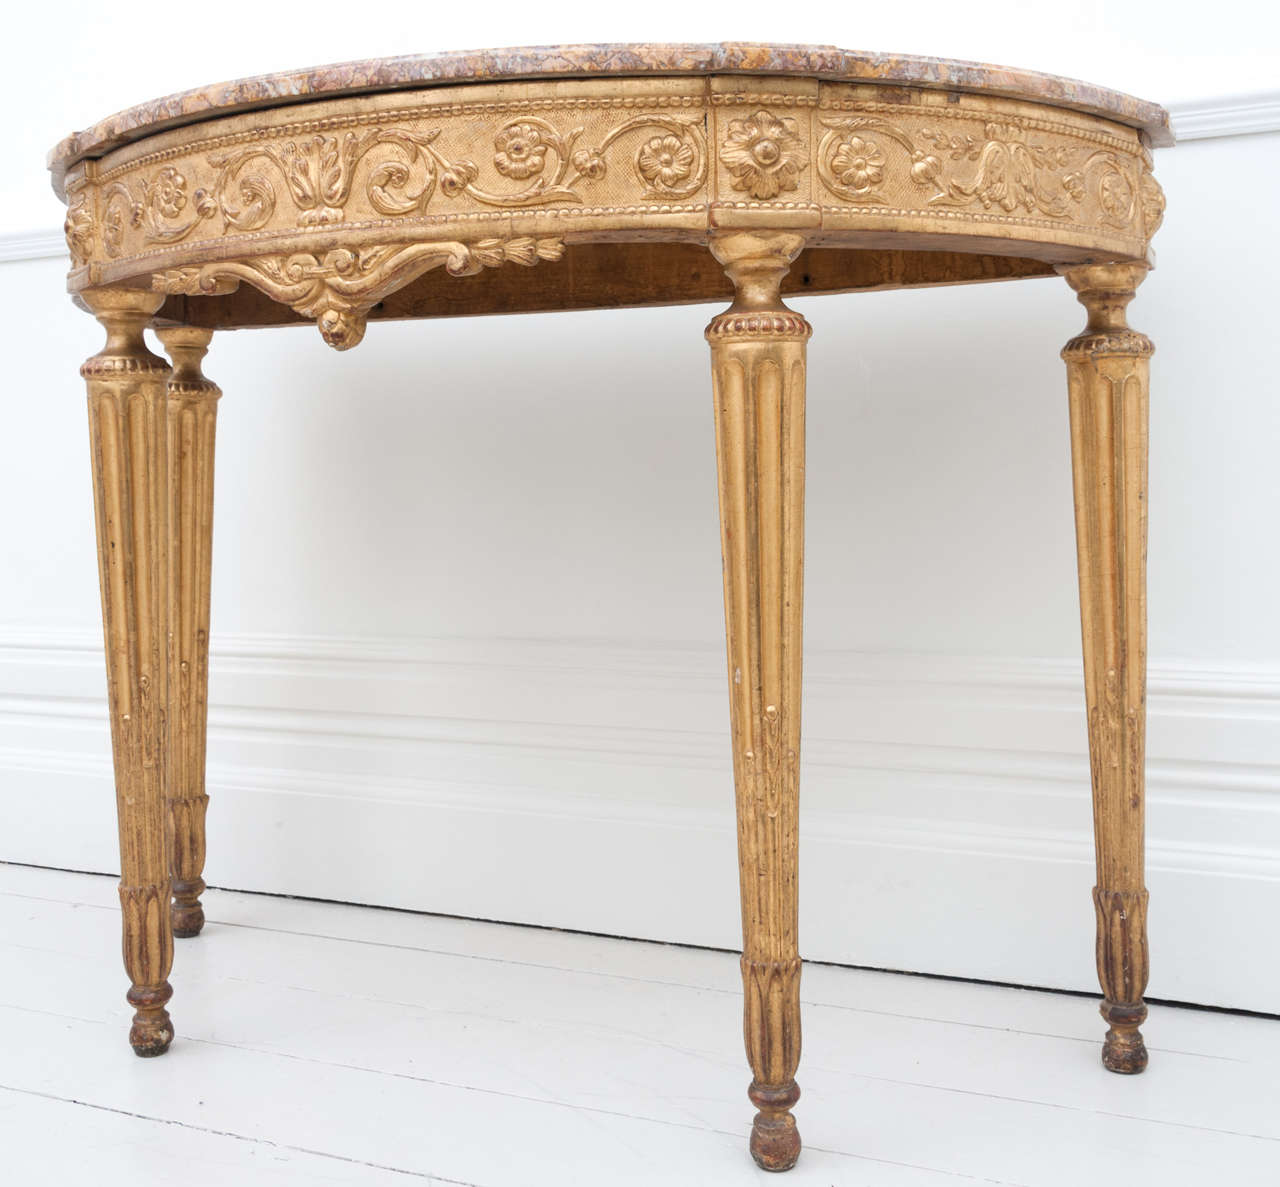 18th Century Italian Genoese Neoclassical Gilded Table For Sale 1